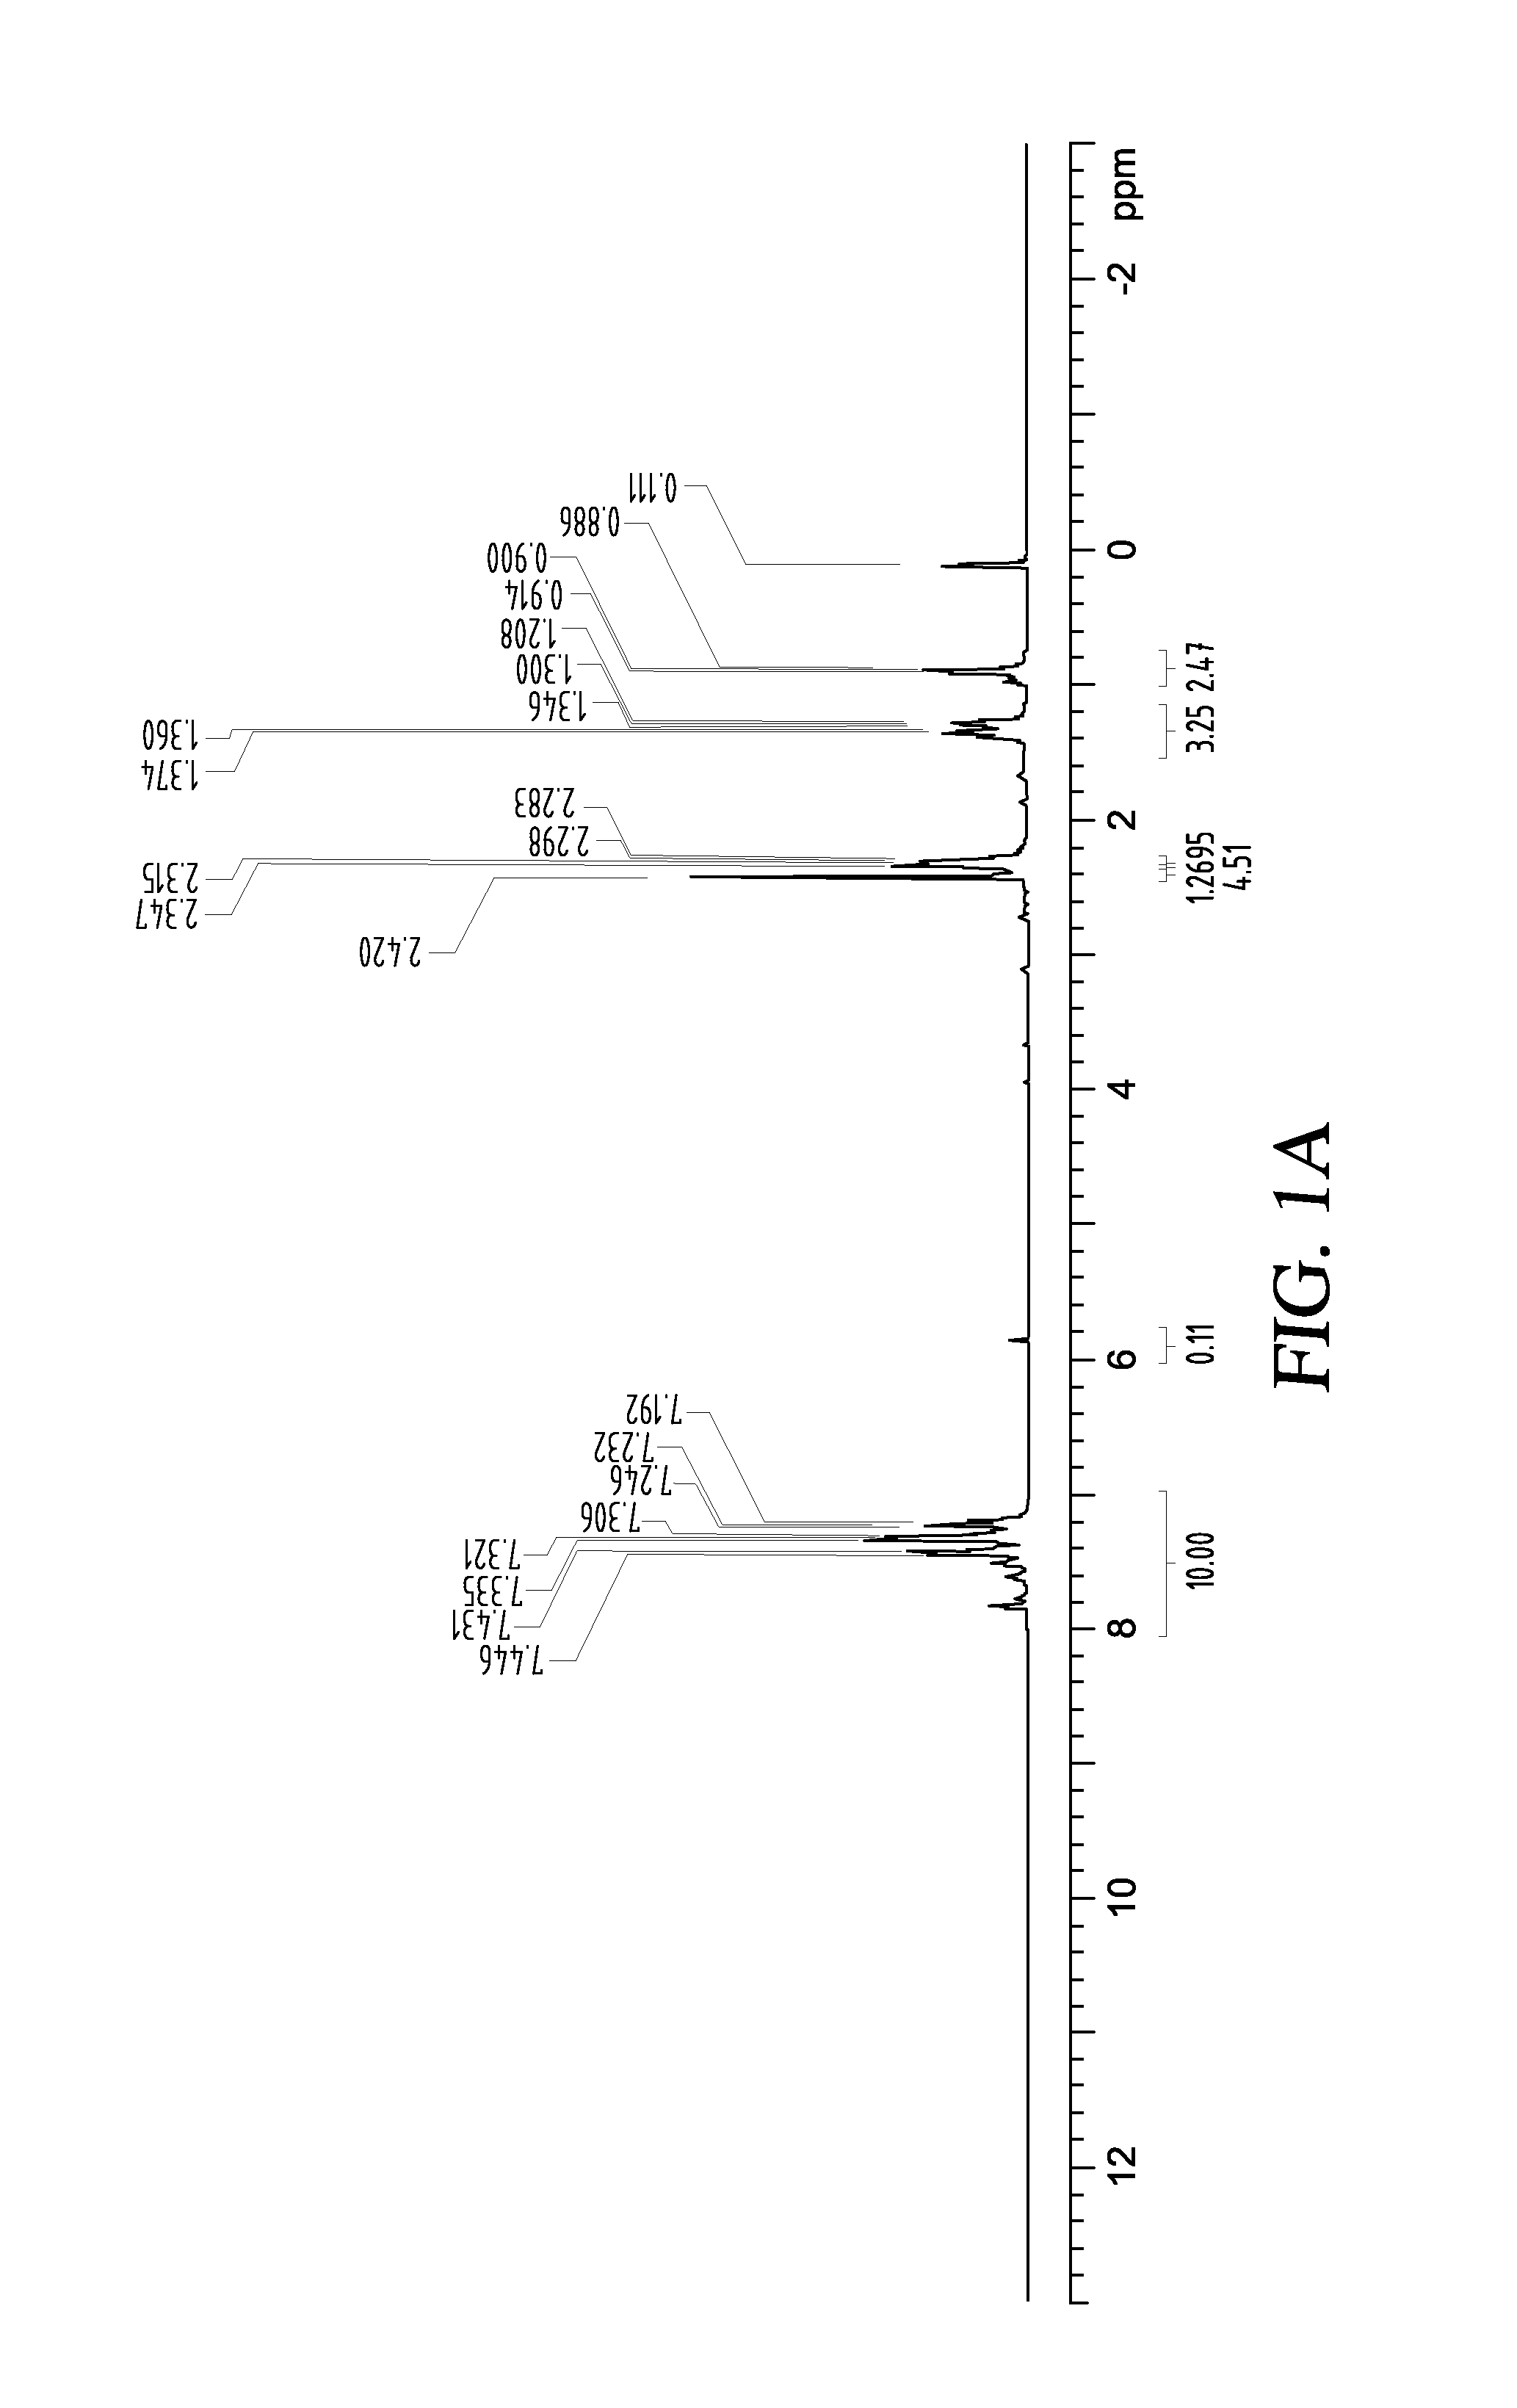 Lithium-porous metal oxide compositions and lithium reagent-porous metal compositions